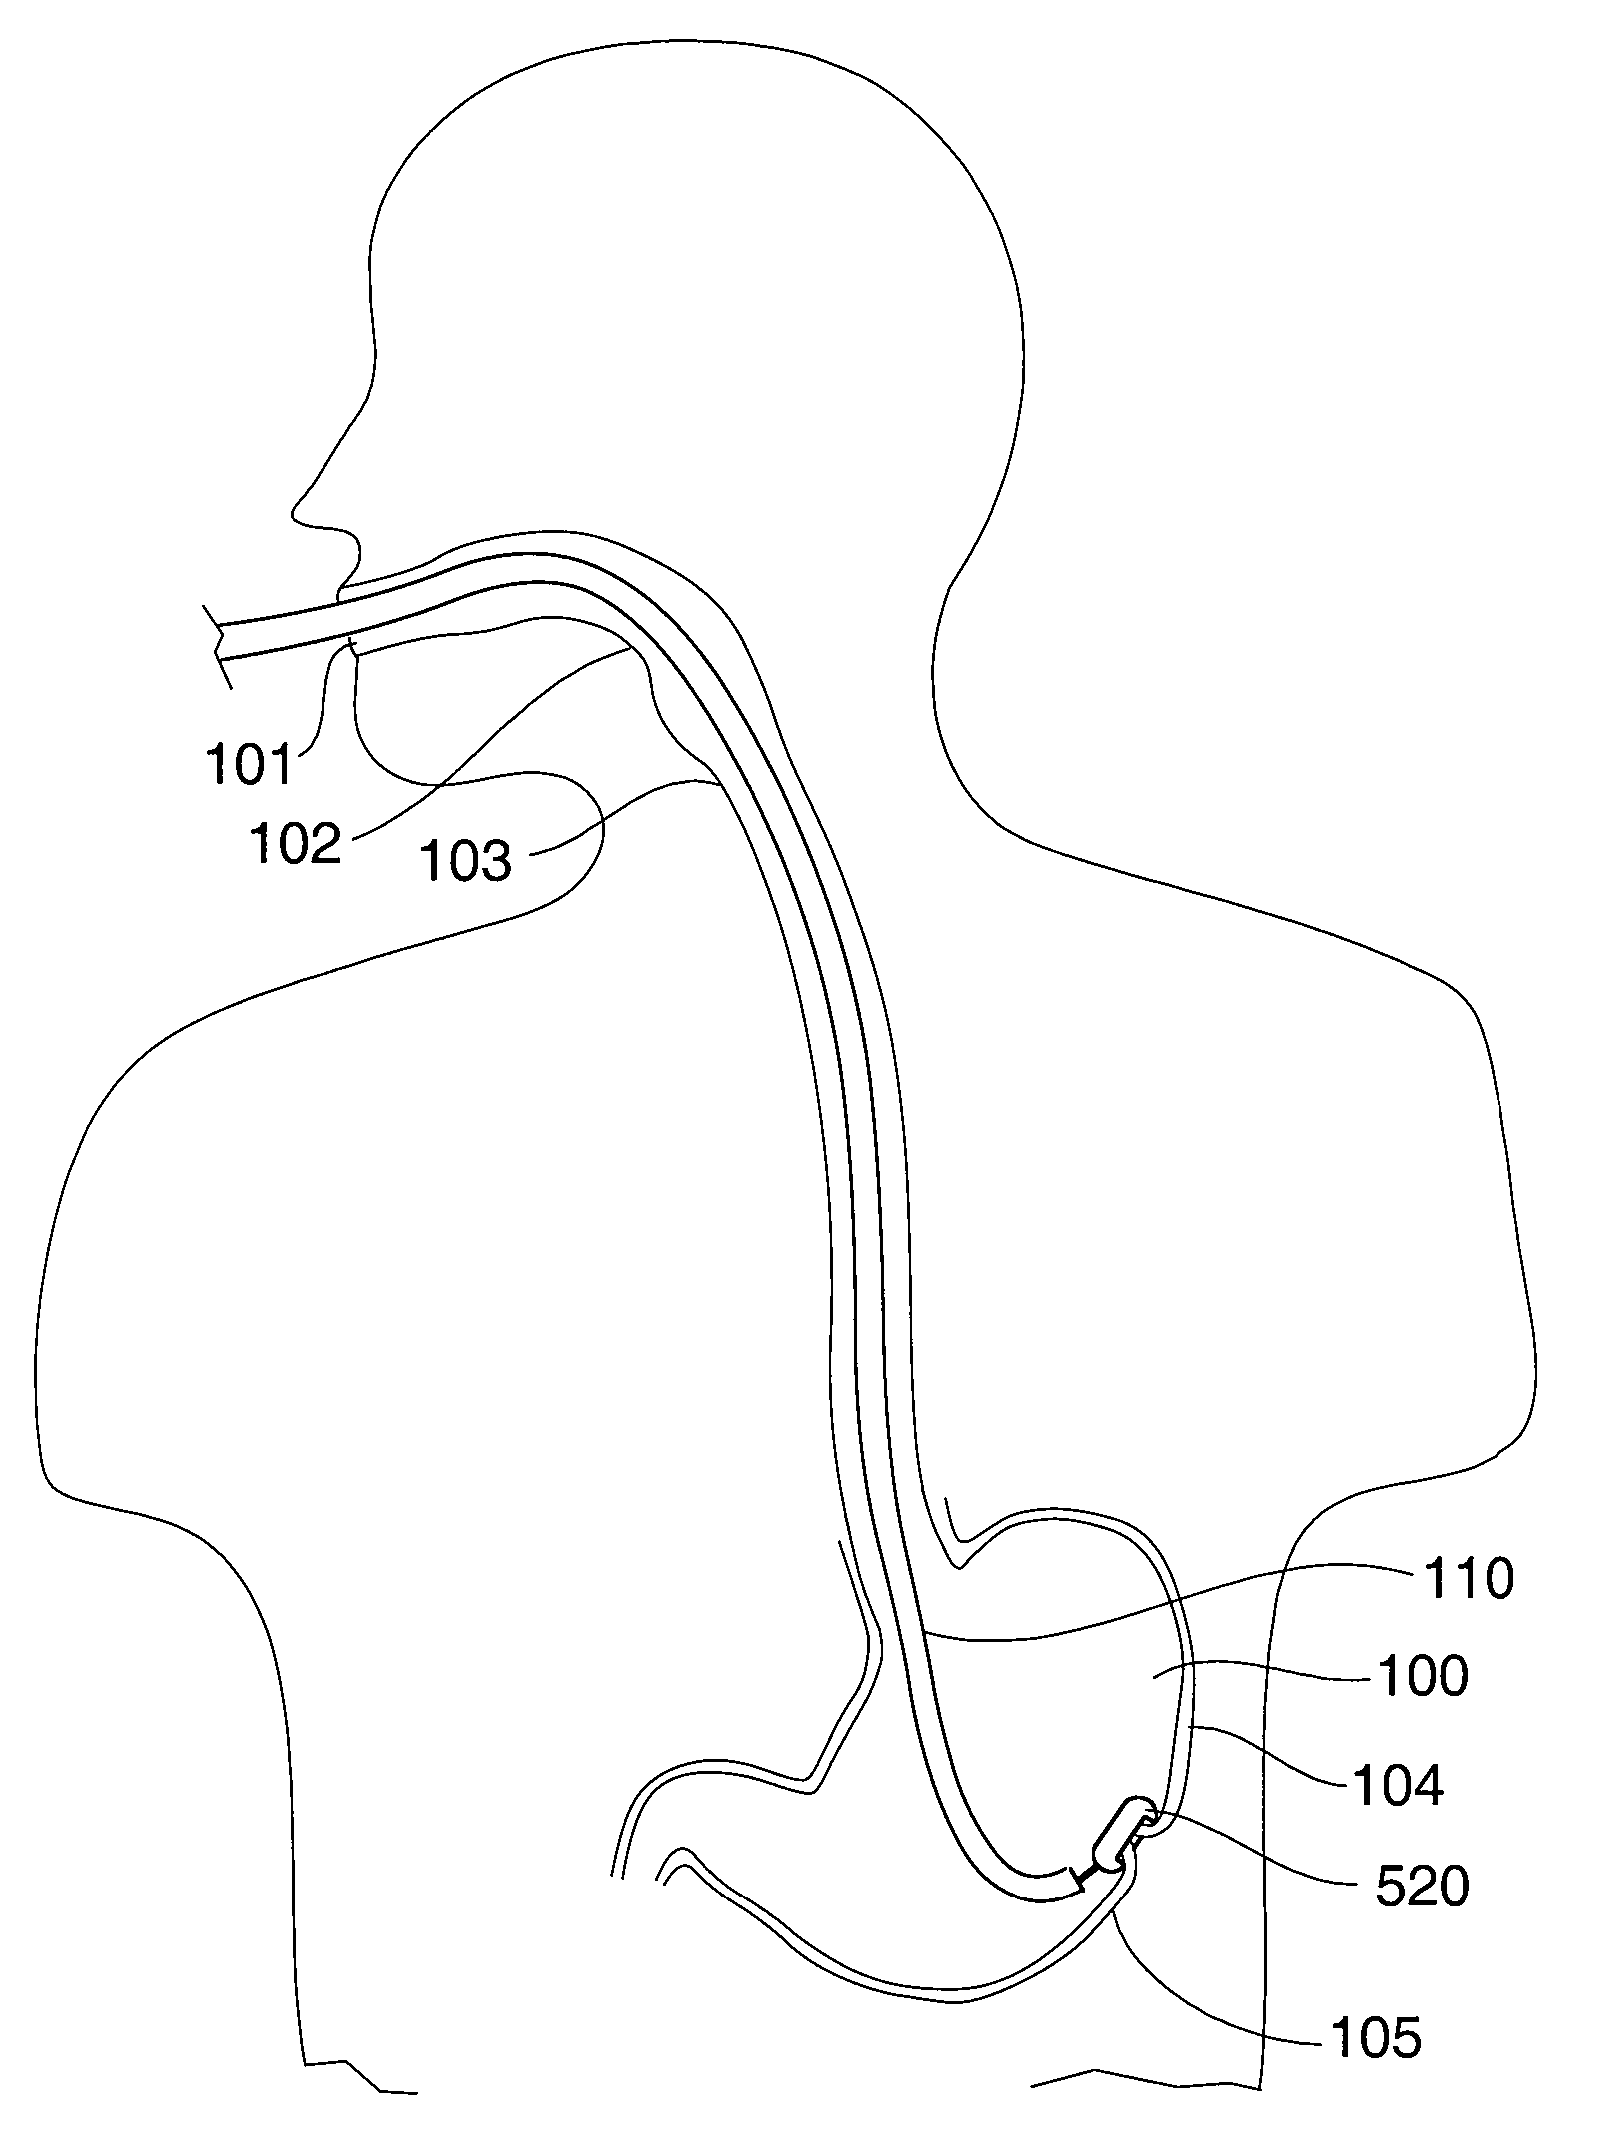 Endoscopic Instrument for Engaging a Device